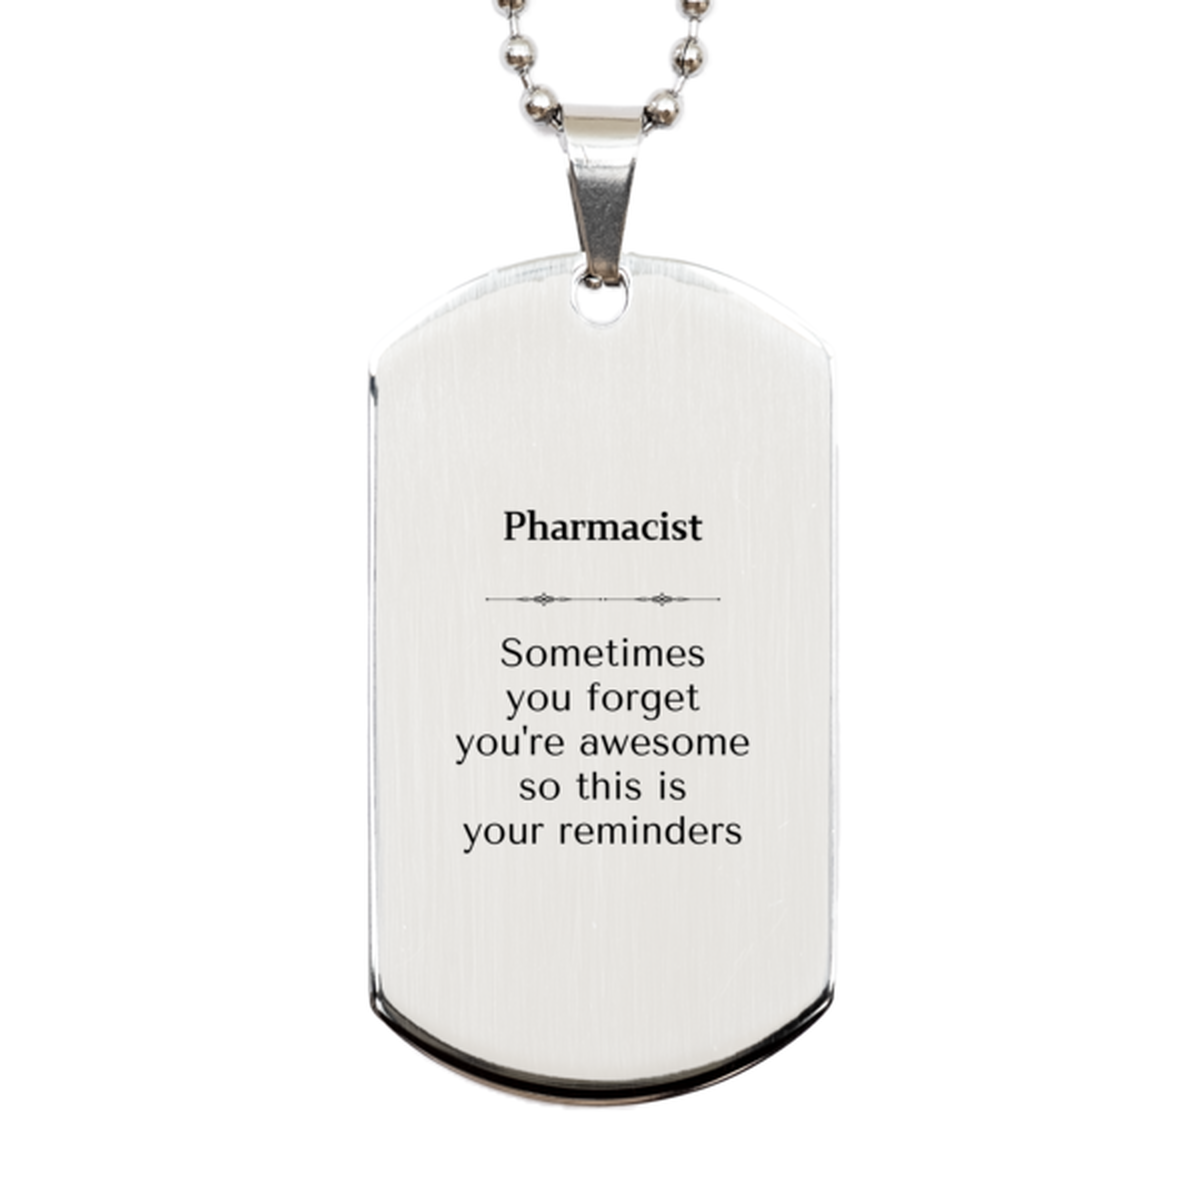 Sentimental Pharmacist Silver Dog Tag, Pharmacist Sometimes you forget you're awesome so this is your reminders, Graduation Christmas Birthday Gifts for Pharmacist, Men, Women, Coworkers